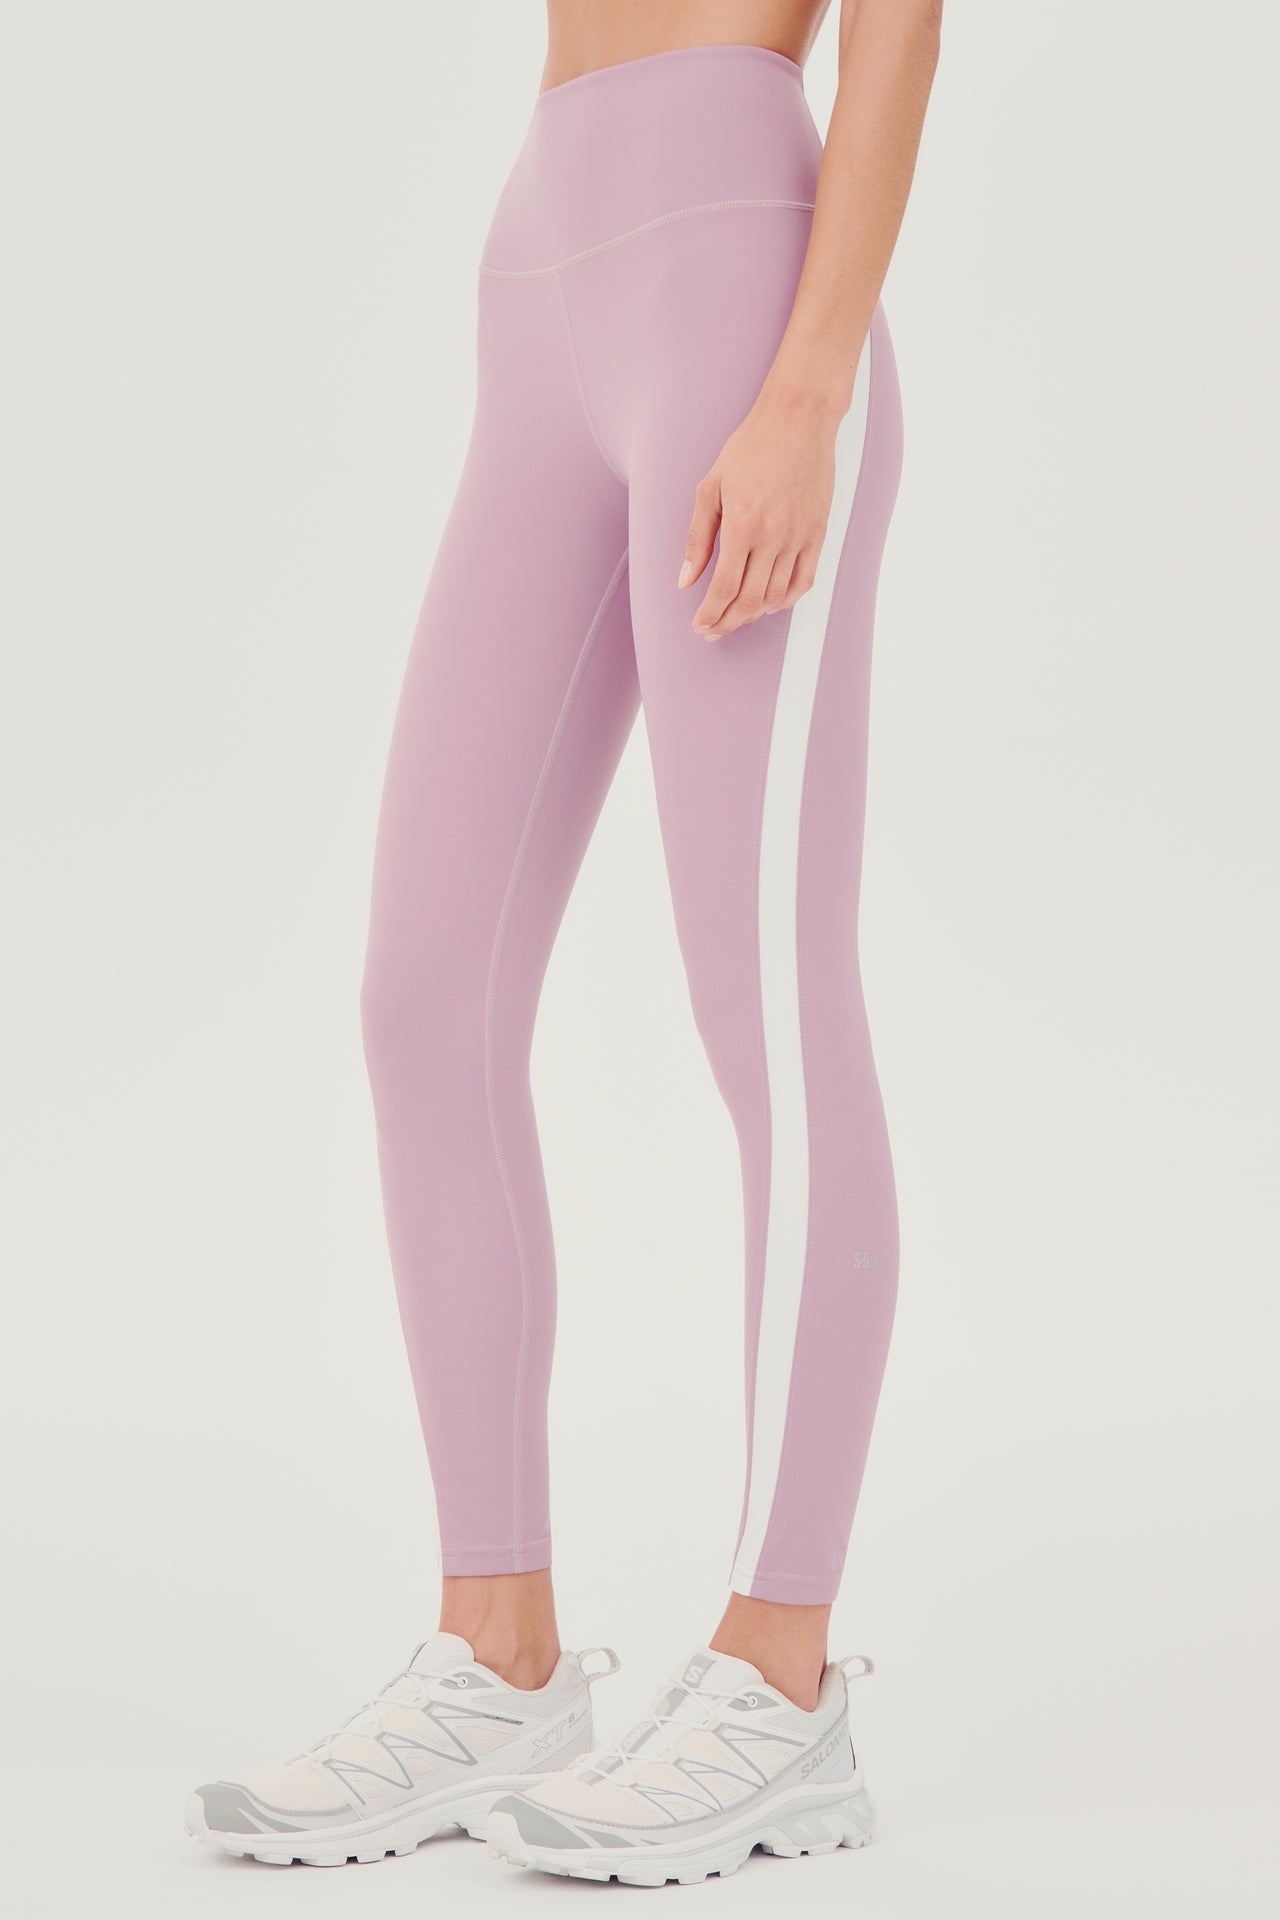 The back view of a woman wearing SPLITS59 Miles High Waist Rigor 7/8 - Blush/White leggings, ready for her yoga session.